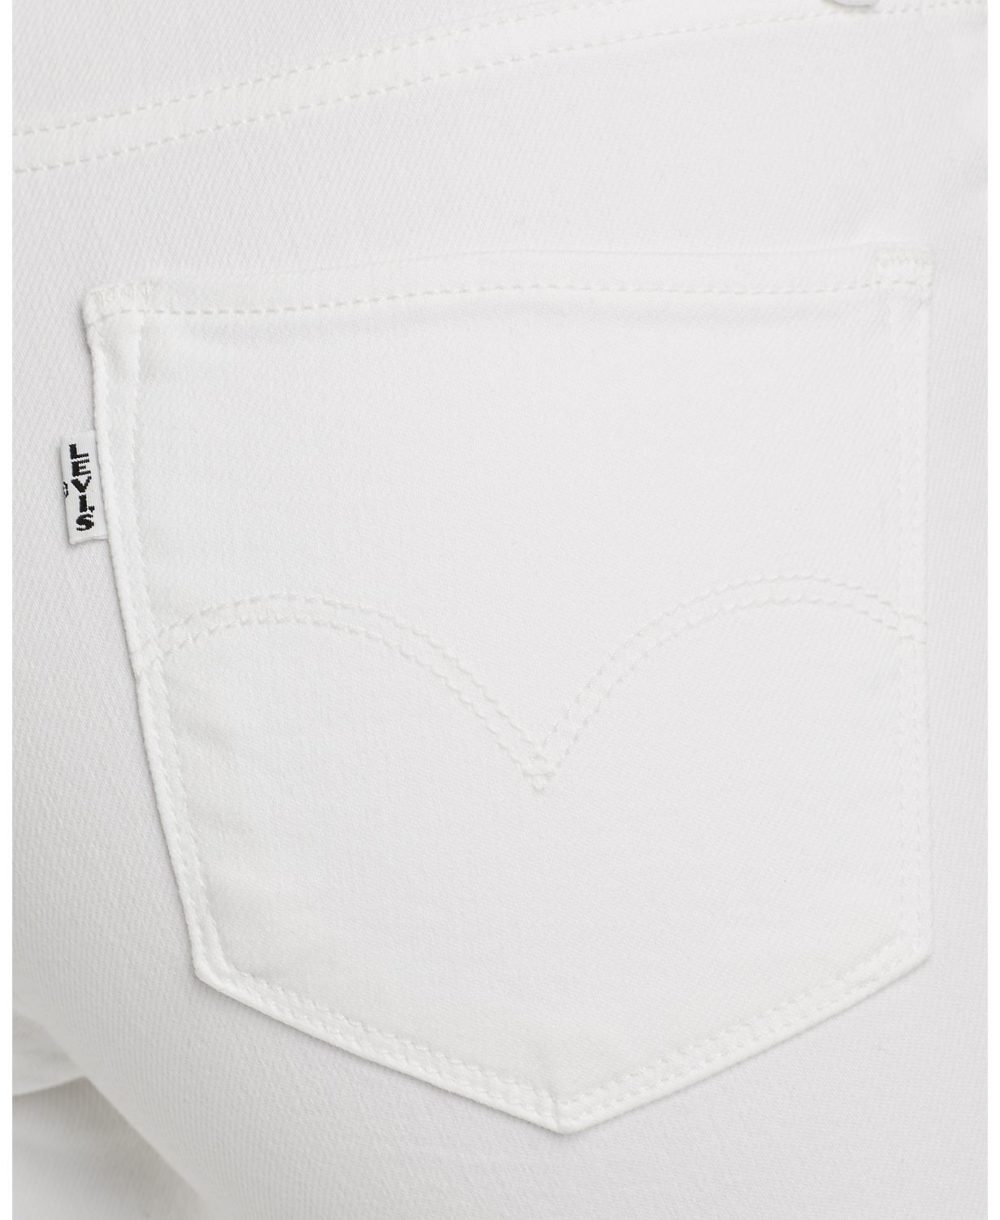 woocommerce-673321-2209615.cloudwaysapps.com-levis-womens-white-721-high-rise-skinny-jeans